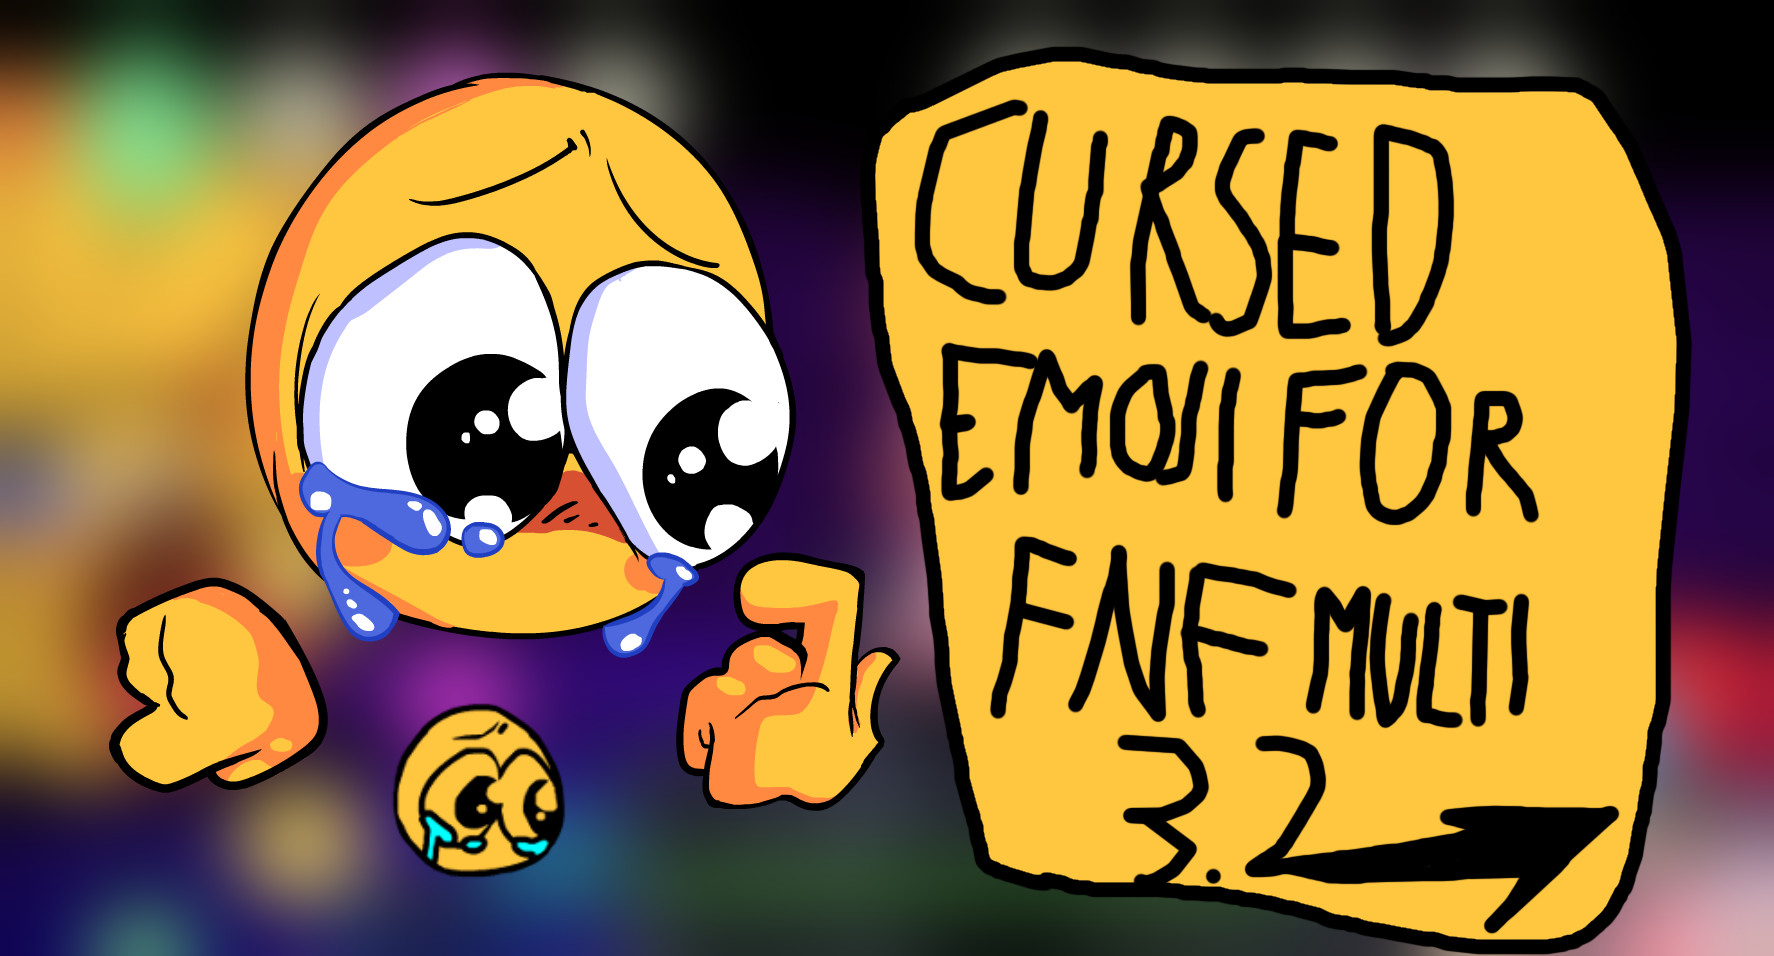 Play FNF - Crying Cursed Emoji over (EXPURGATION) game free online